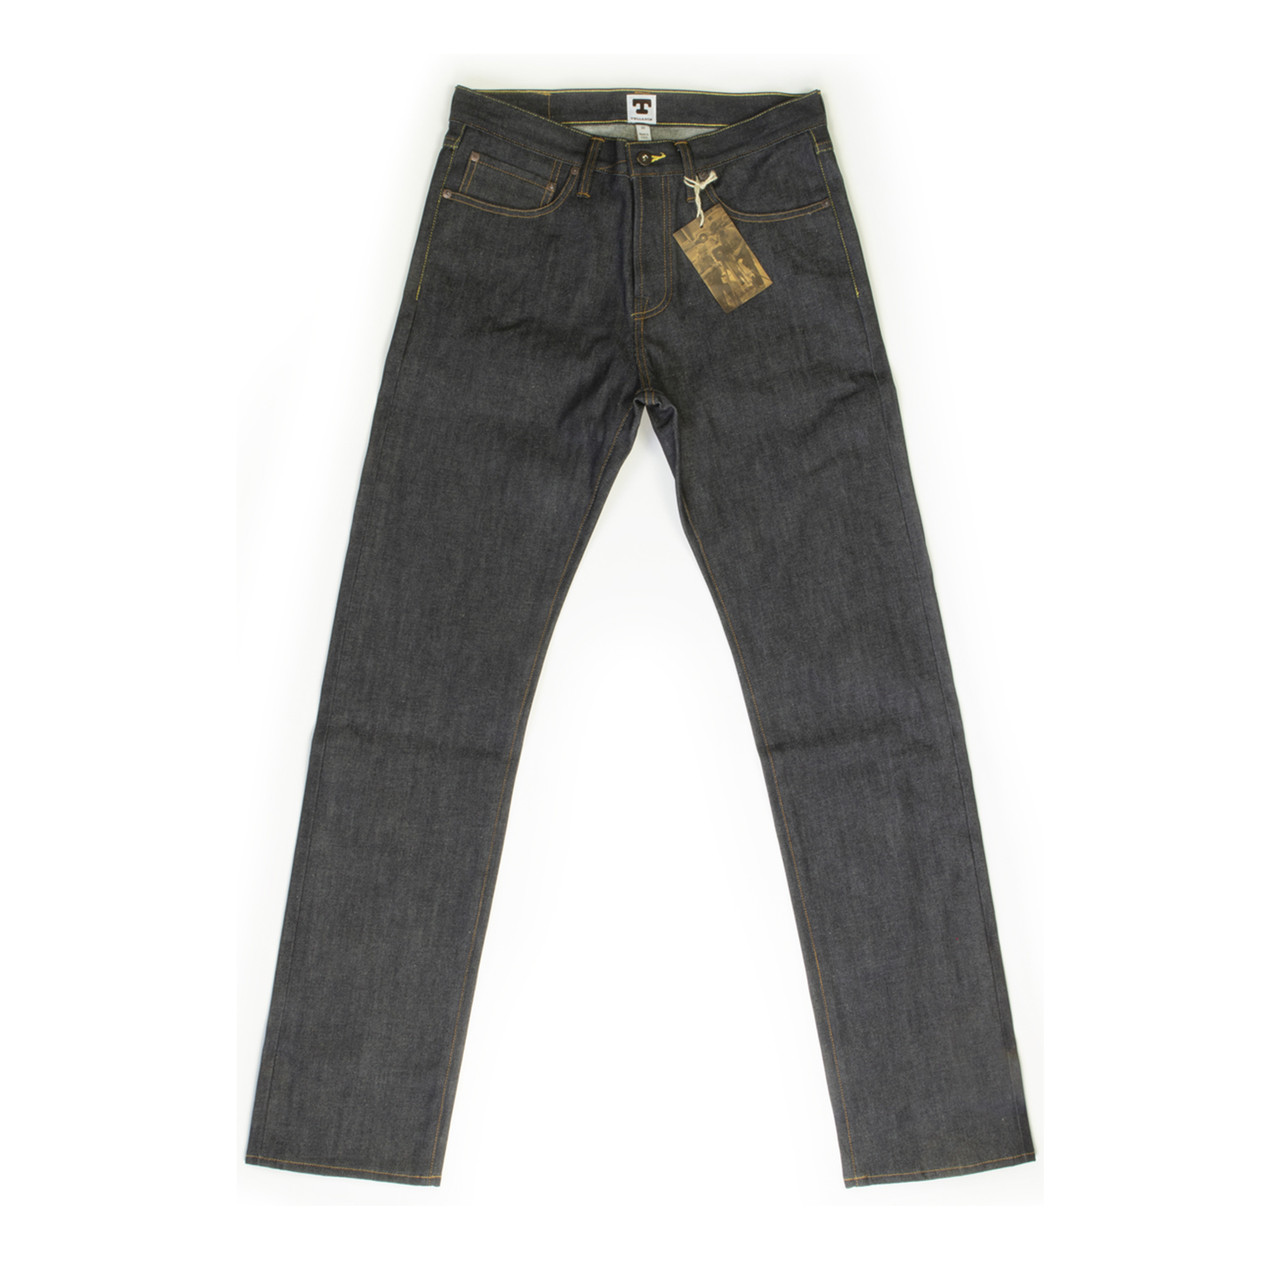 Sheffield - Straight Tapered Selvedge Jeans - 12.5 oz.